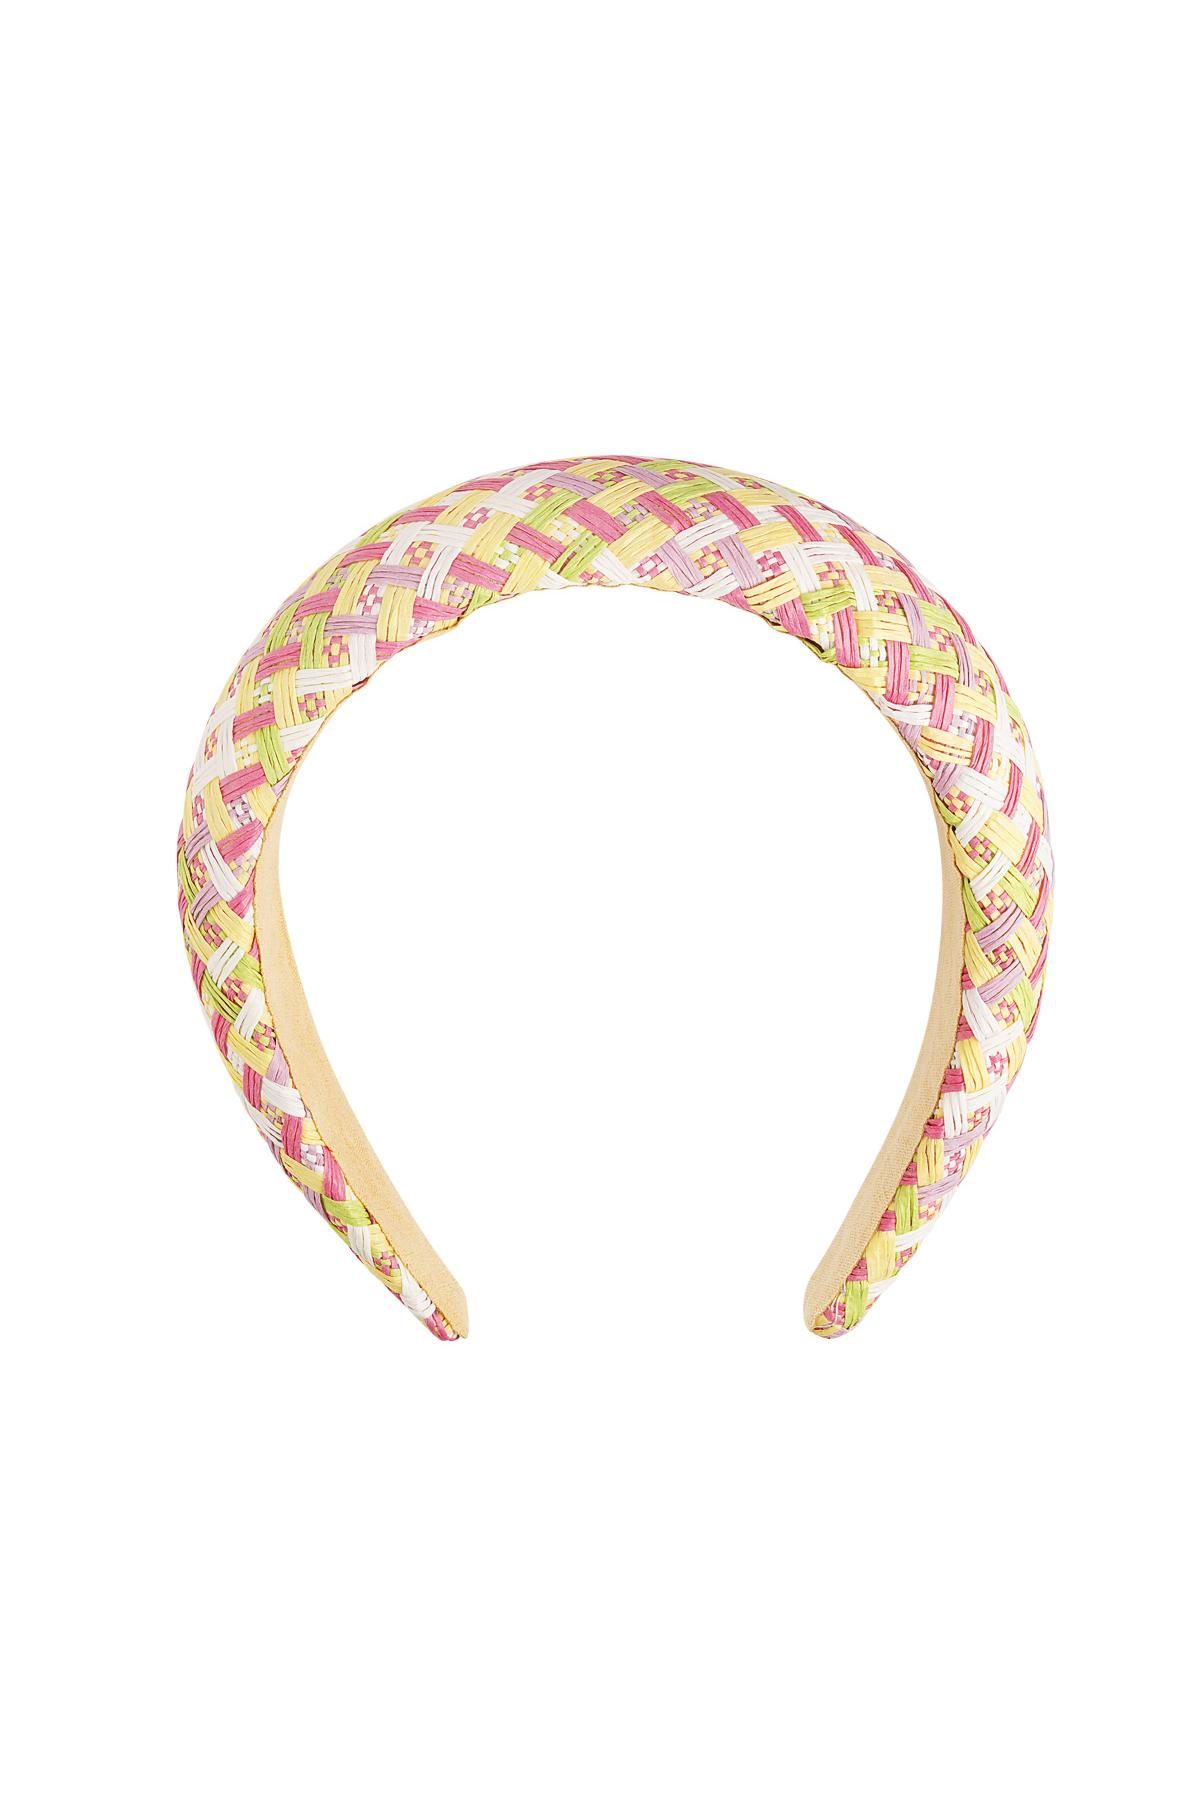 Hair band multi-colored Fabric 